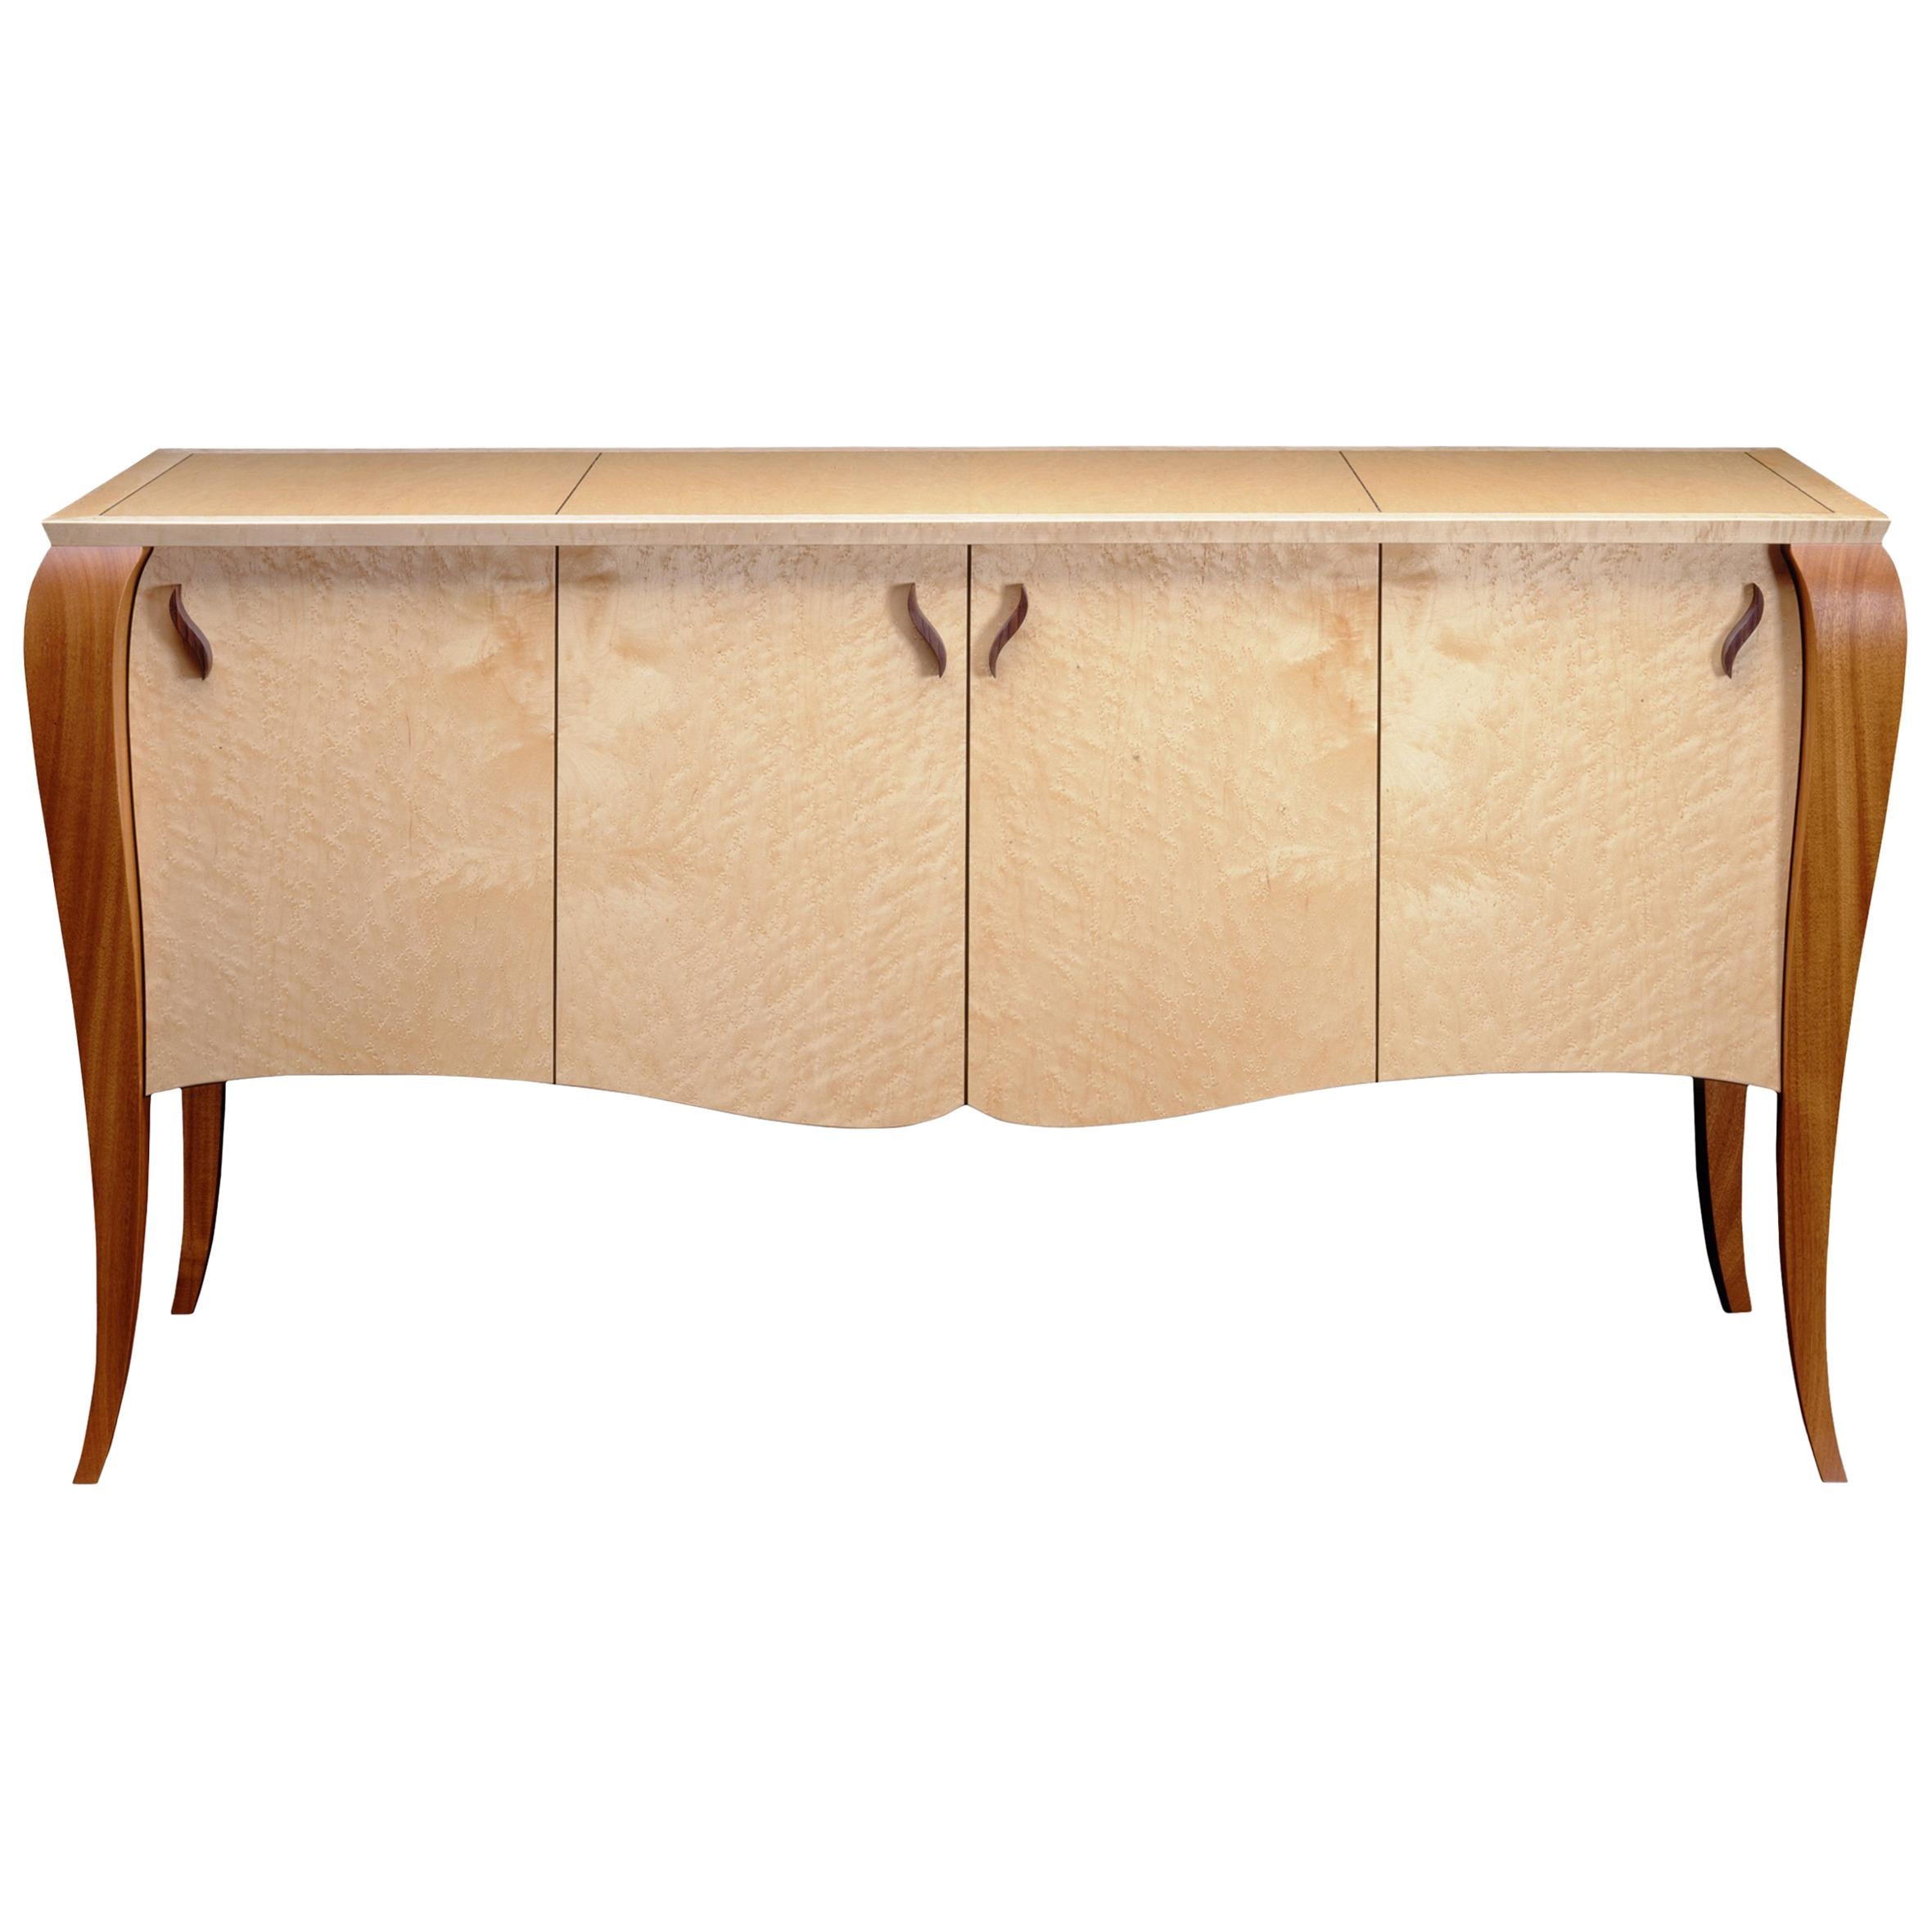 Gazelle Sideboard, Handcrafted Contemporary Credenza with Art Deco Style For Sale